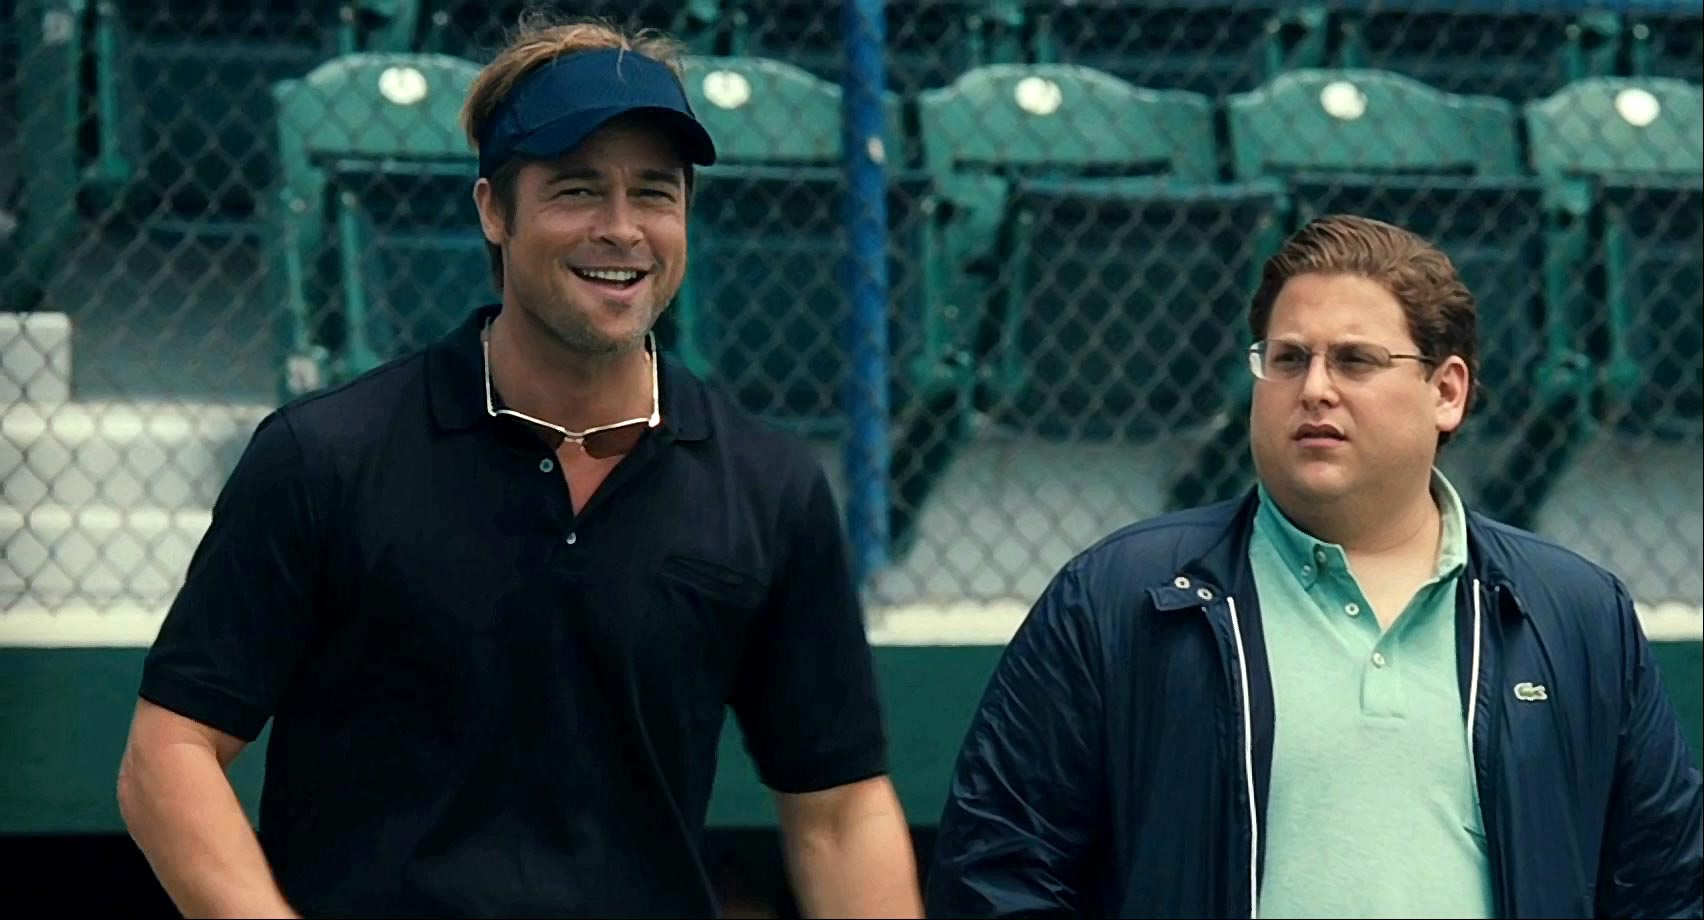 Brad Pitt and Jonah Hill from the movie Moneyball